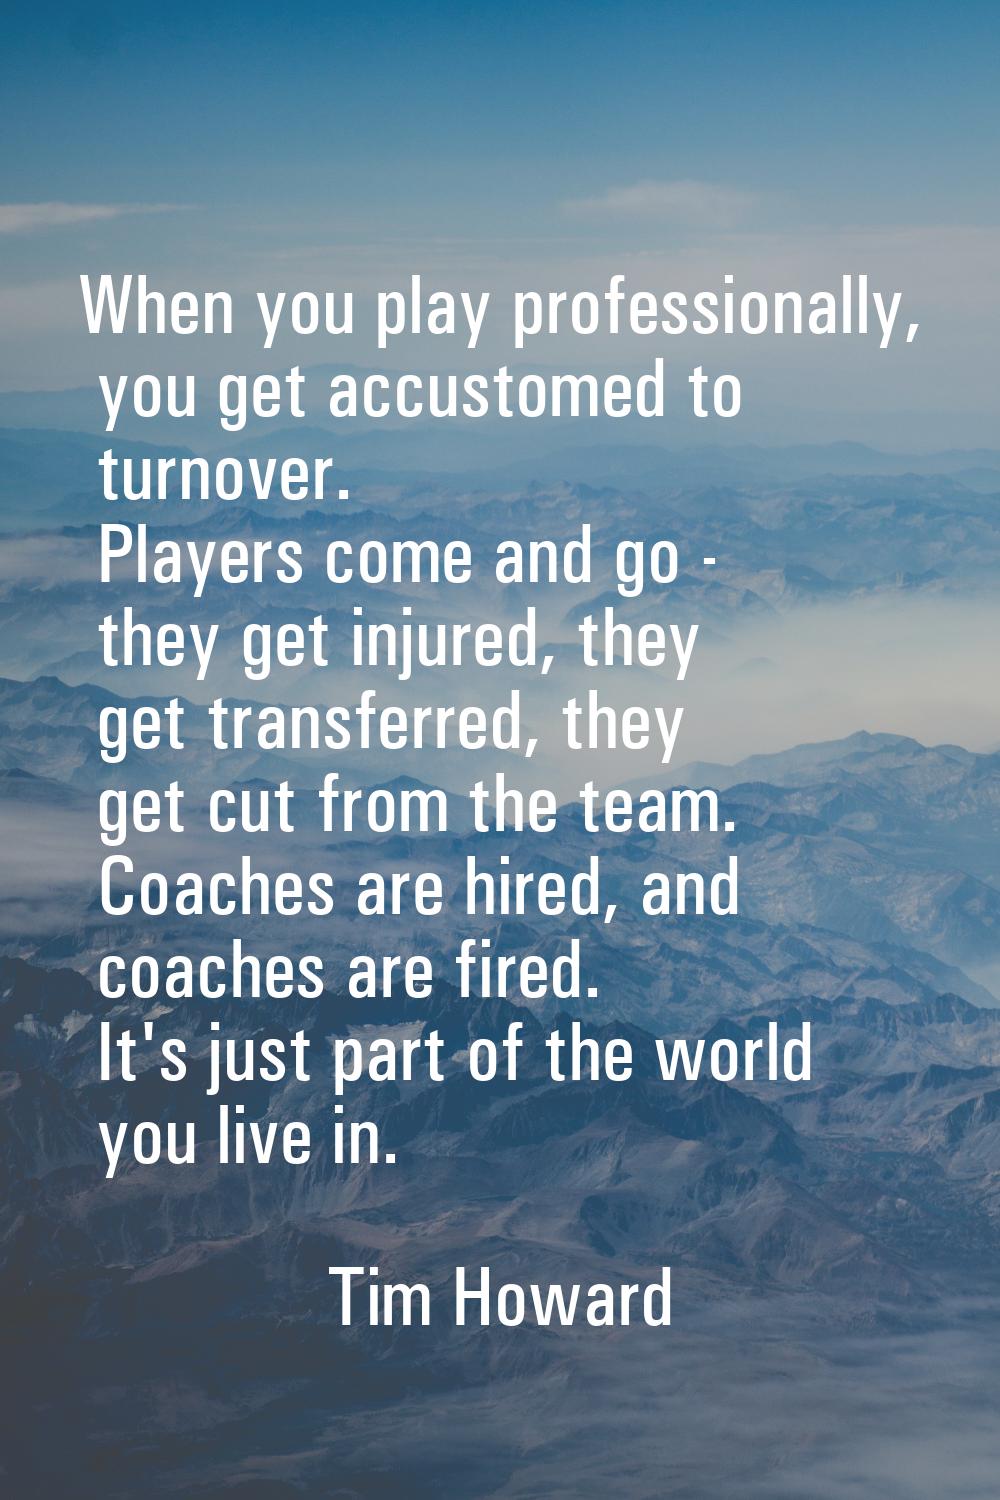 When you play professionally, you get accustomed to turnover. Players come and go - they get injure